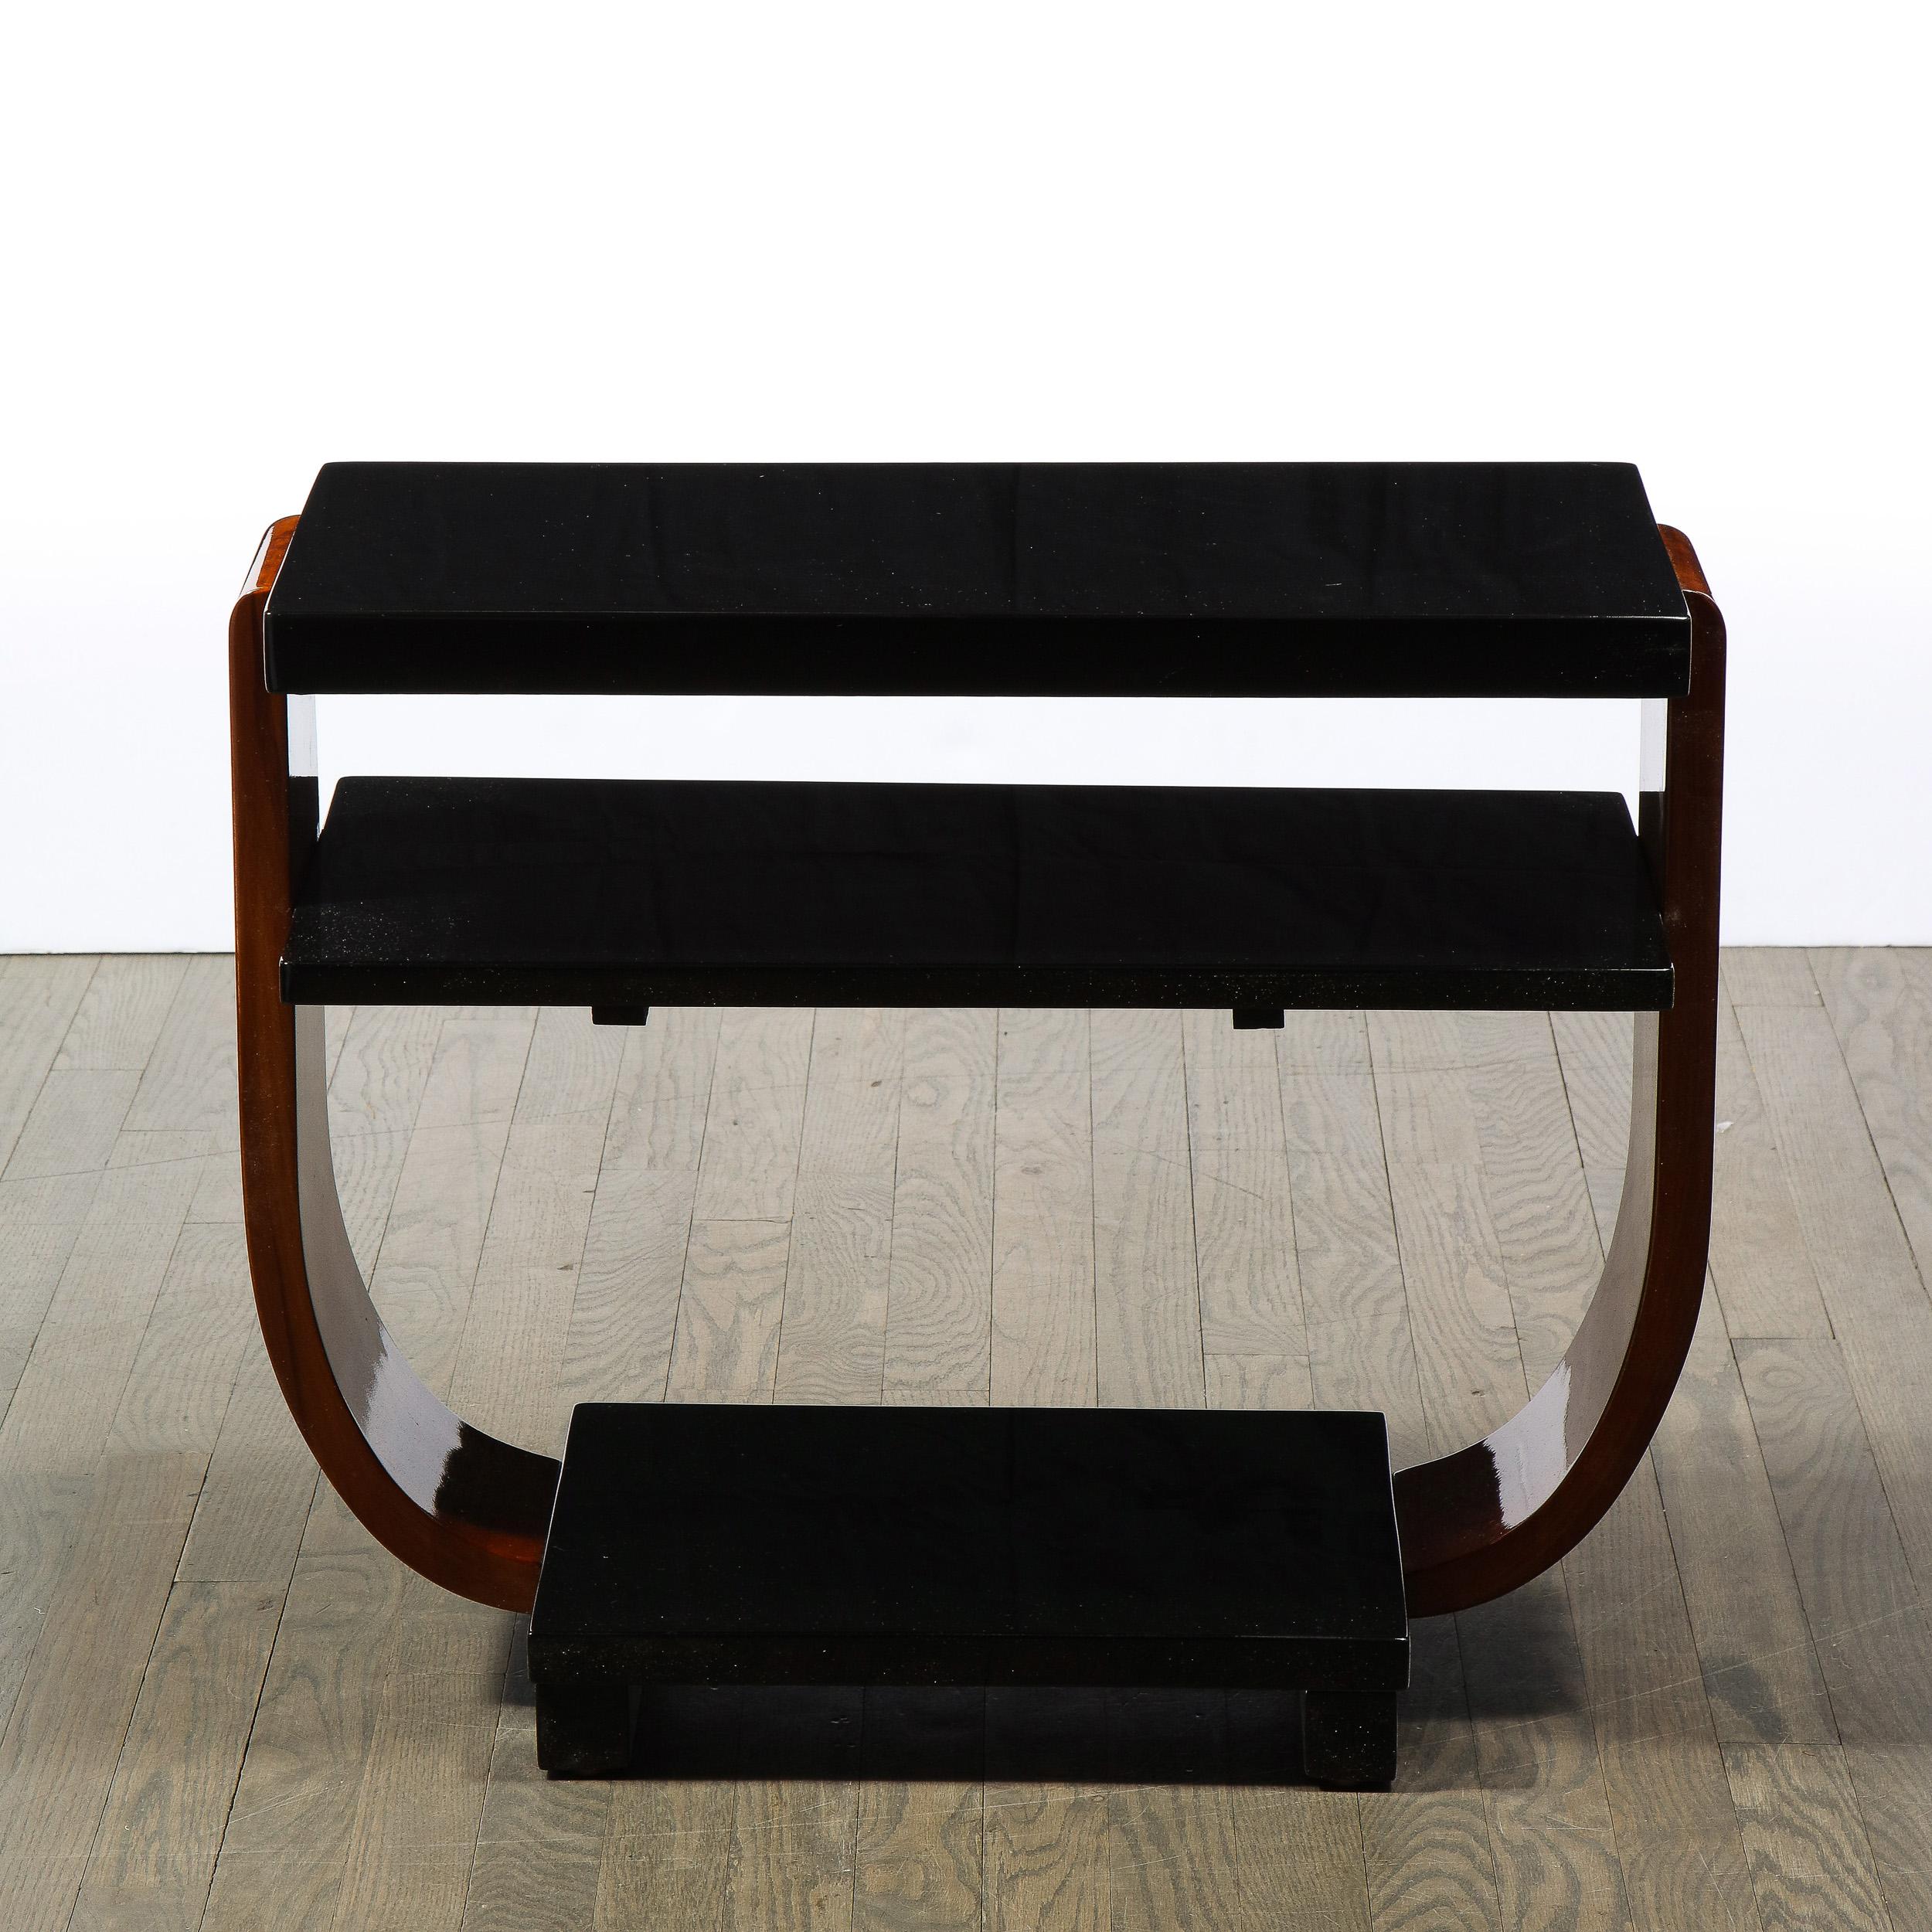 American 1930s Streamline Art Deco Walnut and Black Lacquer Two Tier Side Tables